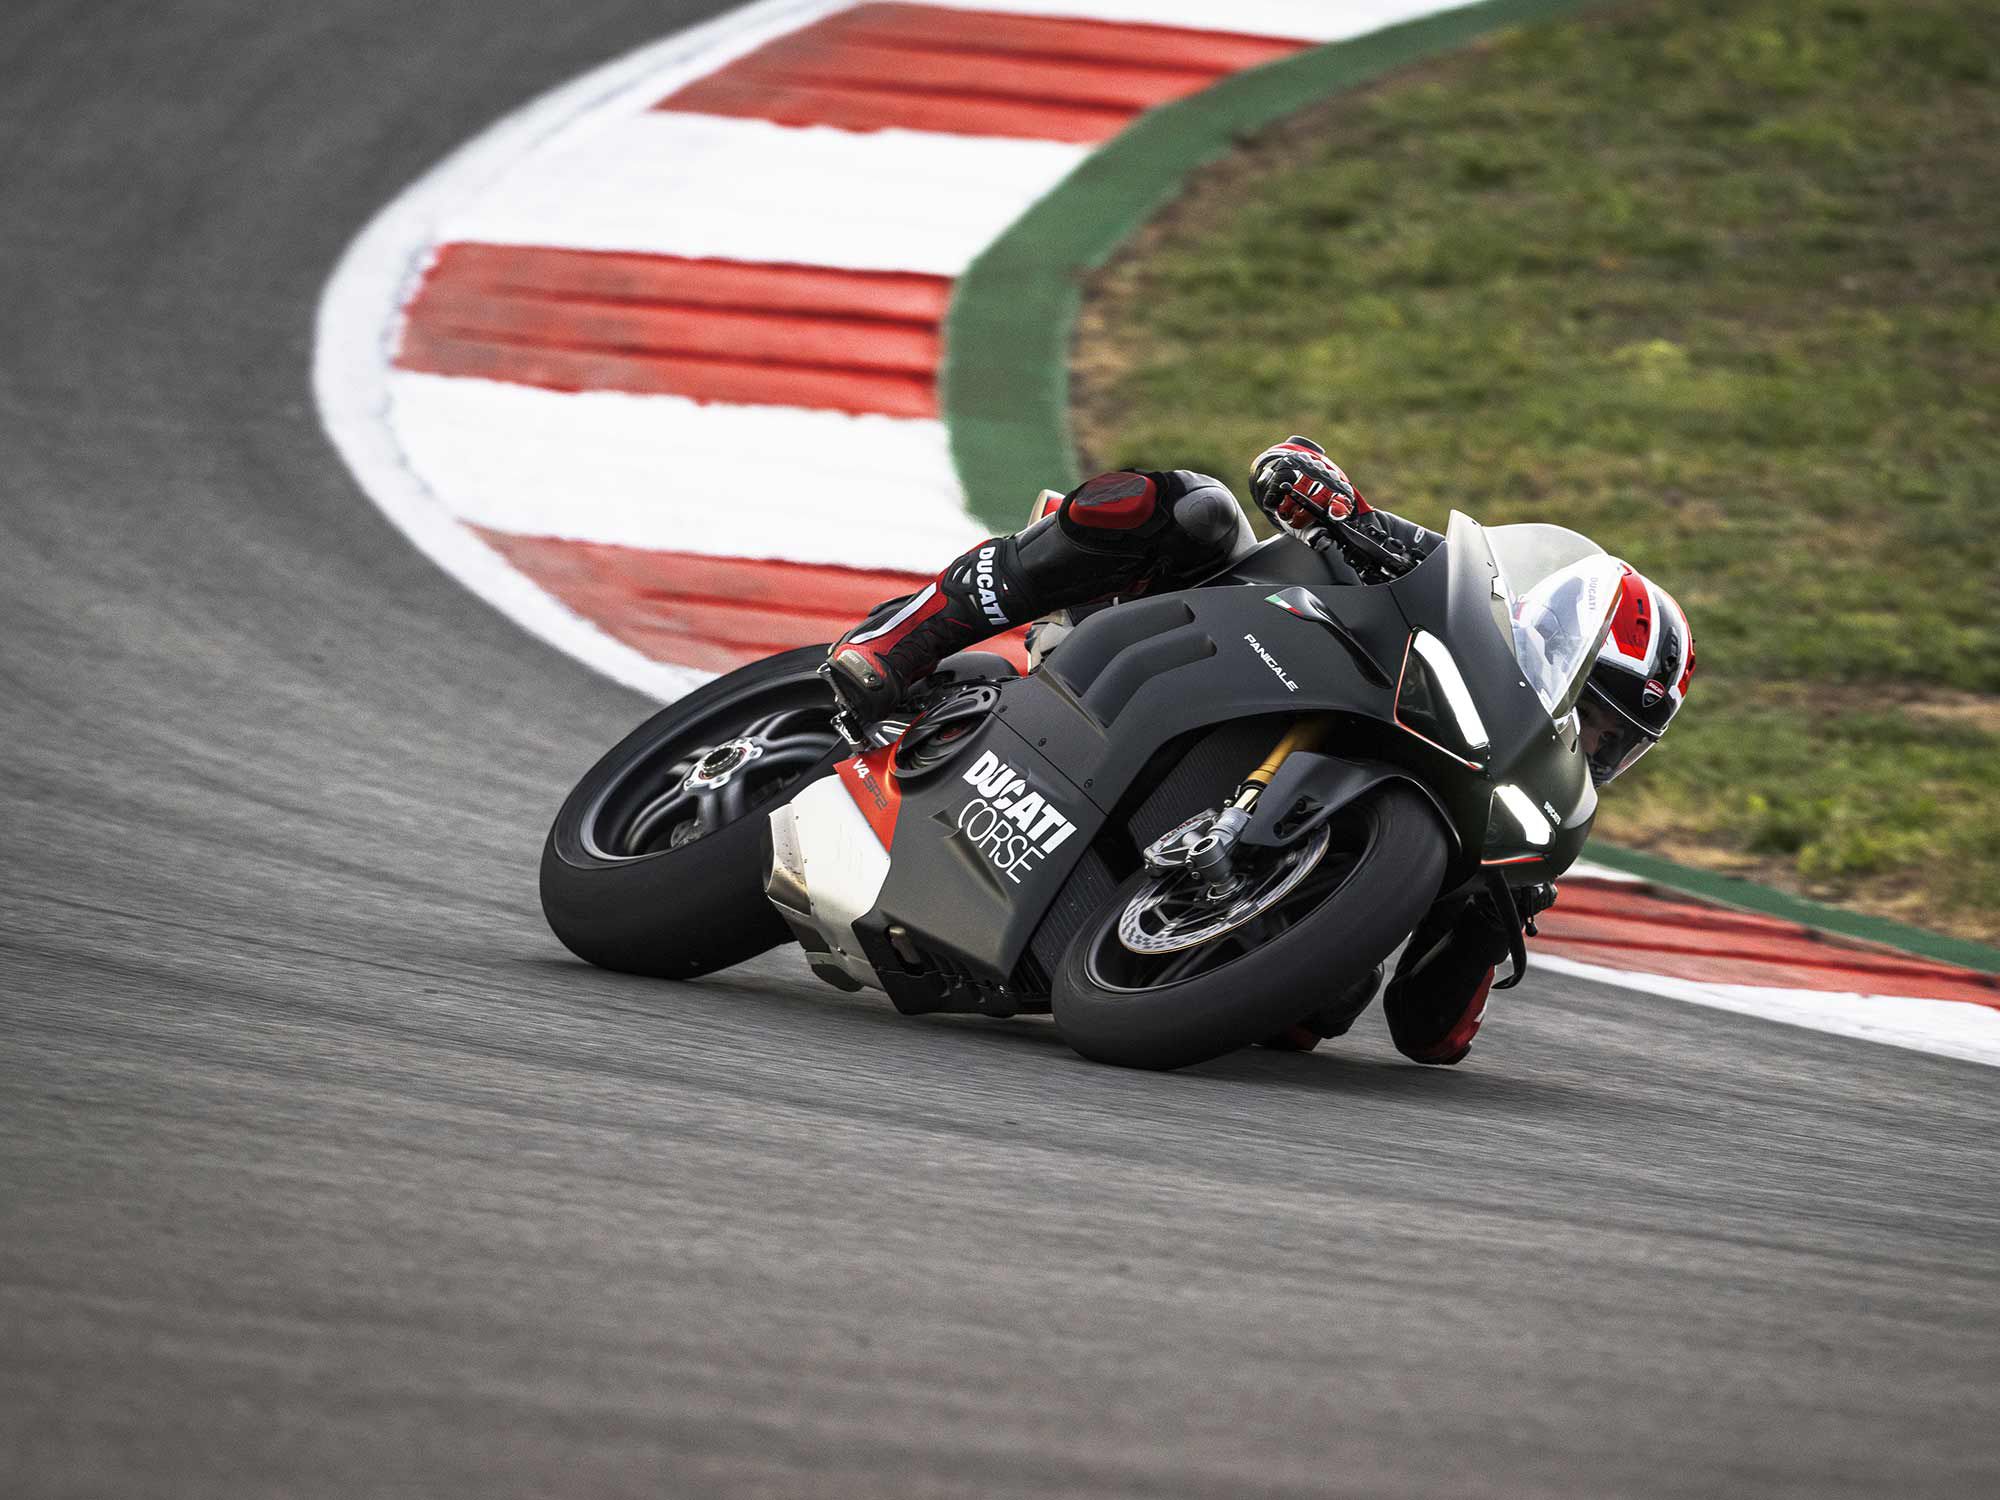 The standard Ducati Data Analyzer system will allow you to track all major ride metrics after a session on the track.